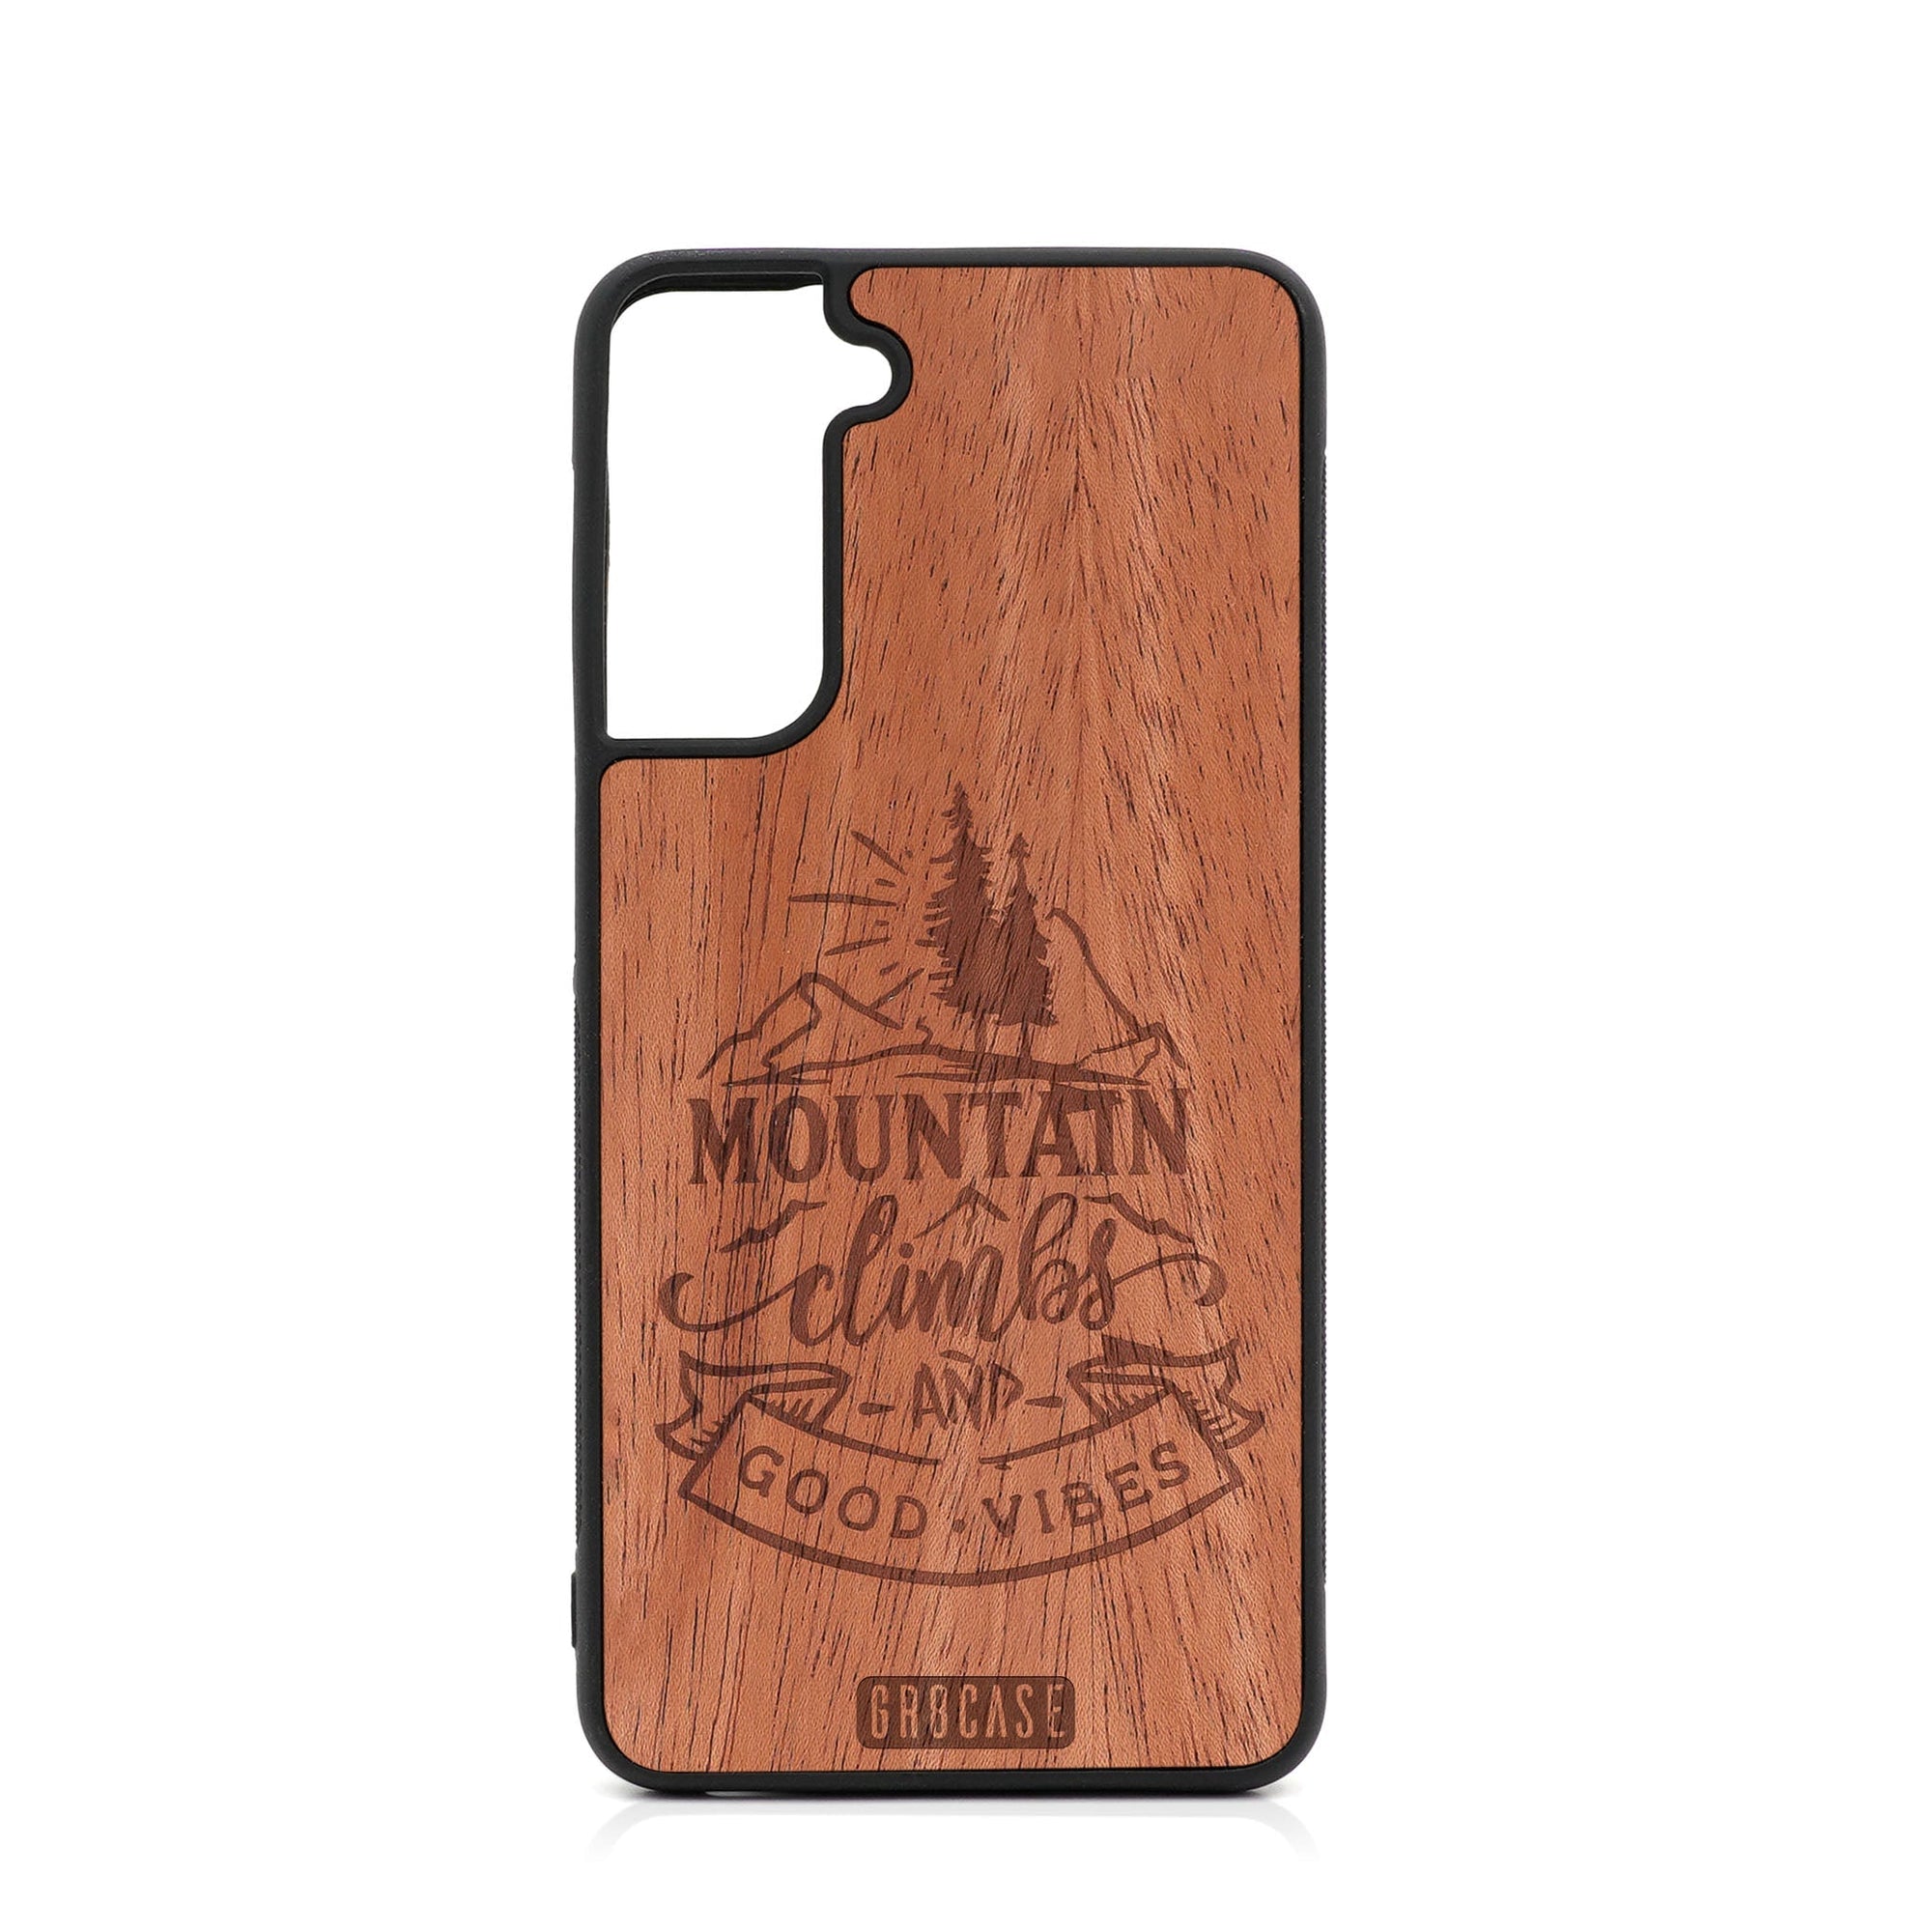 Mountain Climbs And Good Vibes Design Wood Case For Samsung Galaxy S21 FE 5G